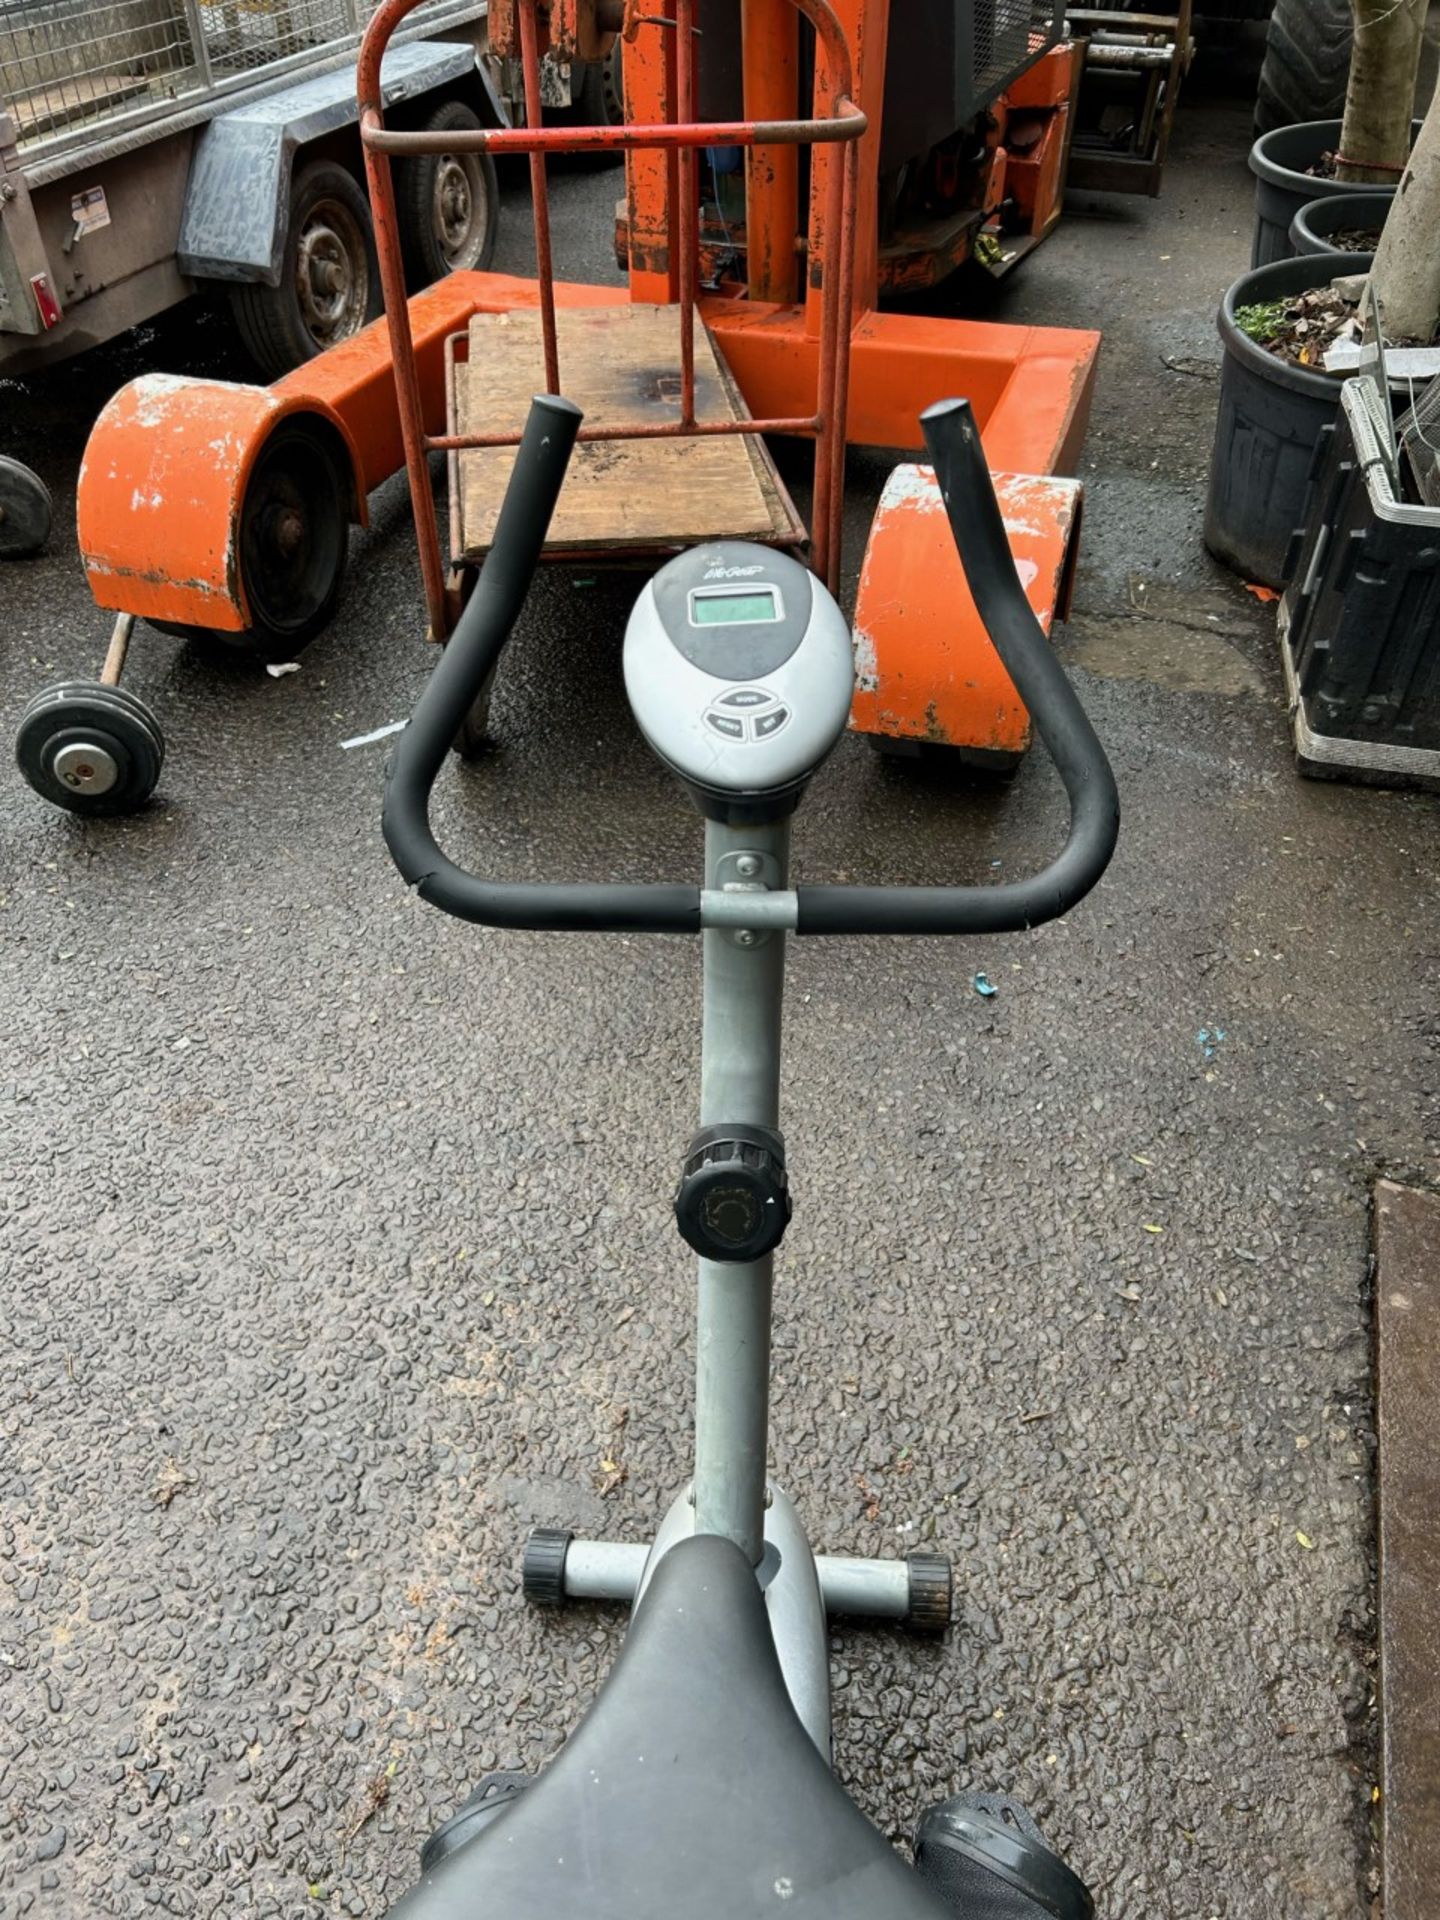 Small lifegear exercise bike. Good for house or garage. Used and average condition. Needs new